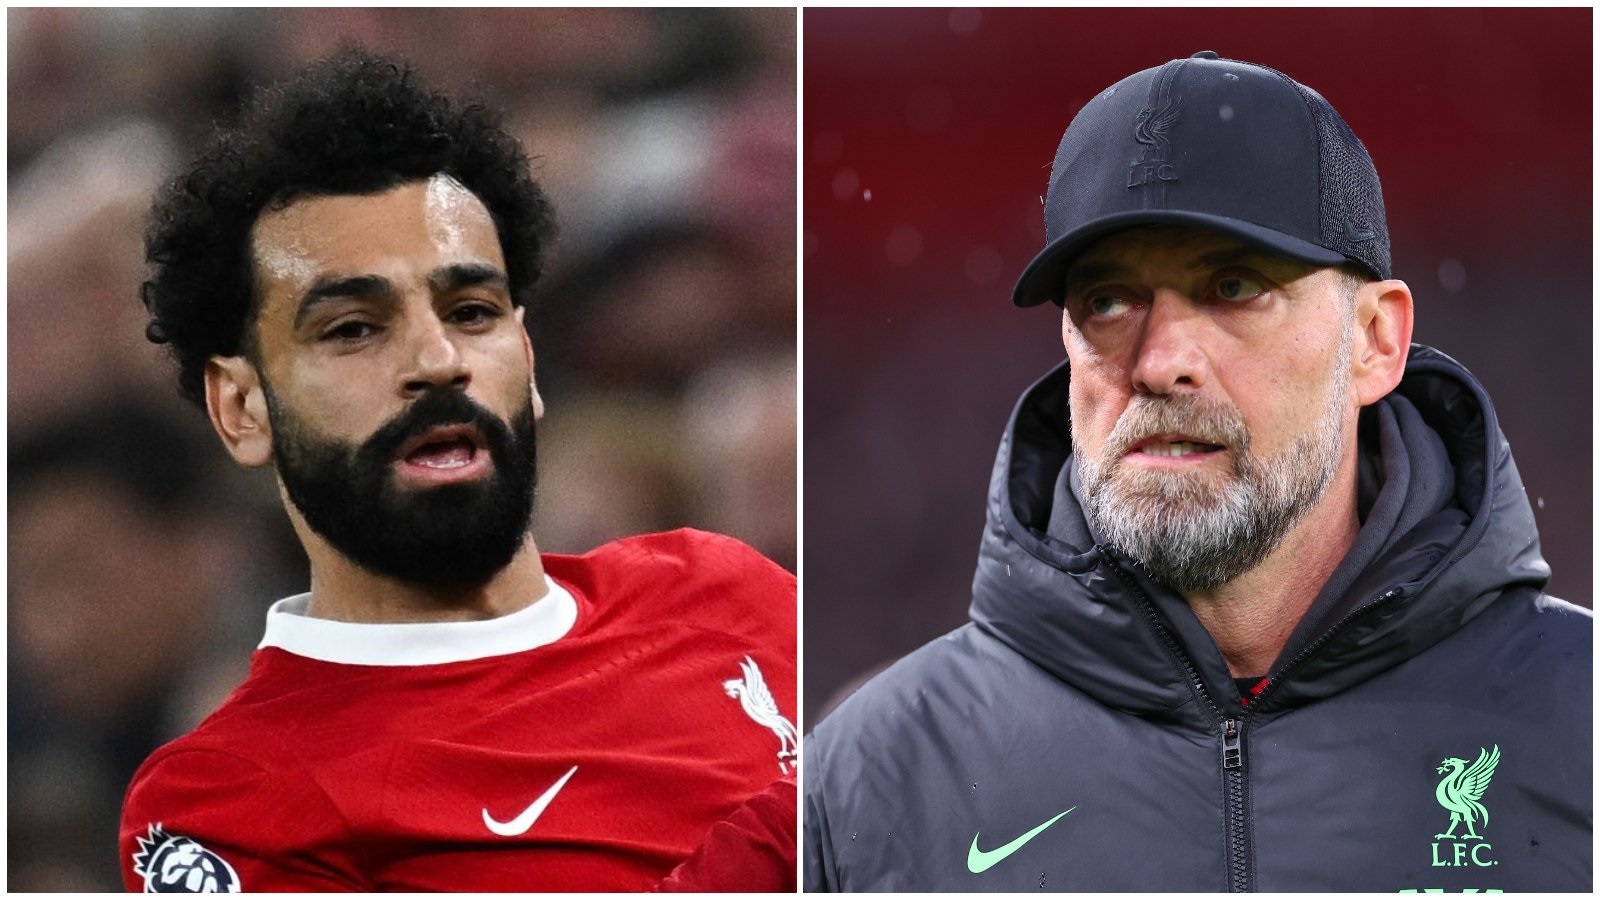 Jurgen Klopp makes substitution claim after taking off Mo Salah in Liverpool win